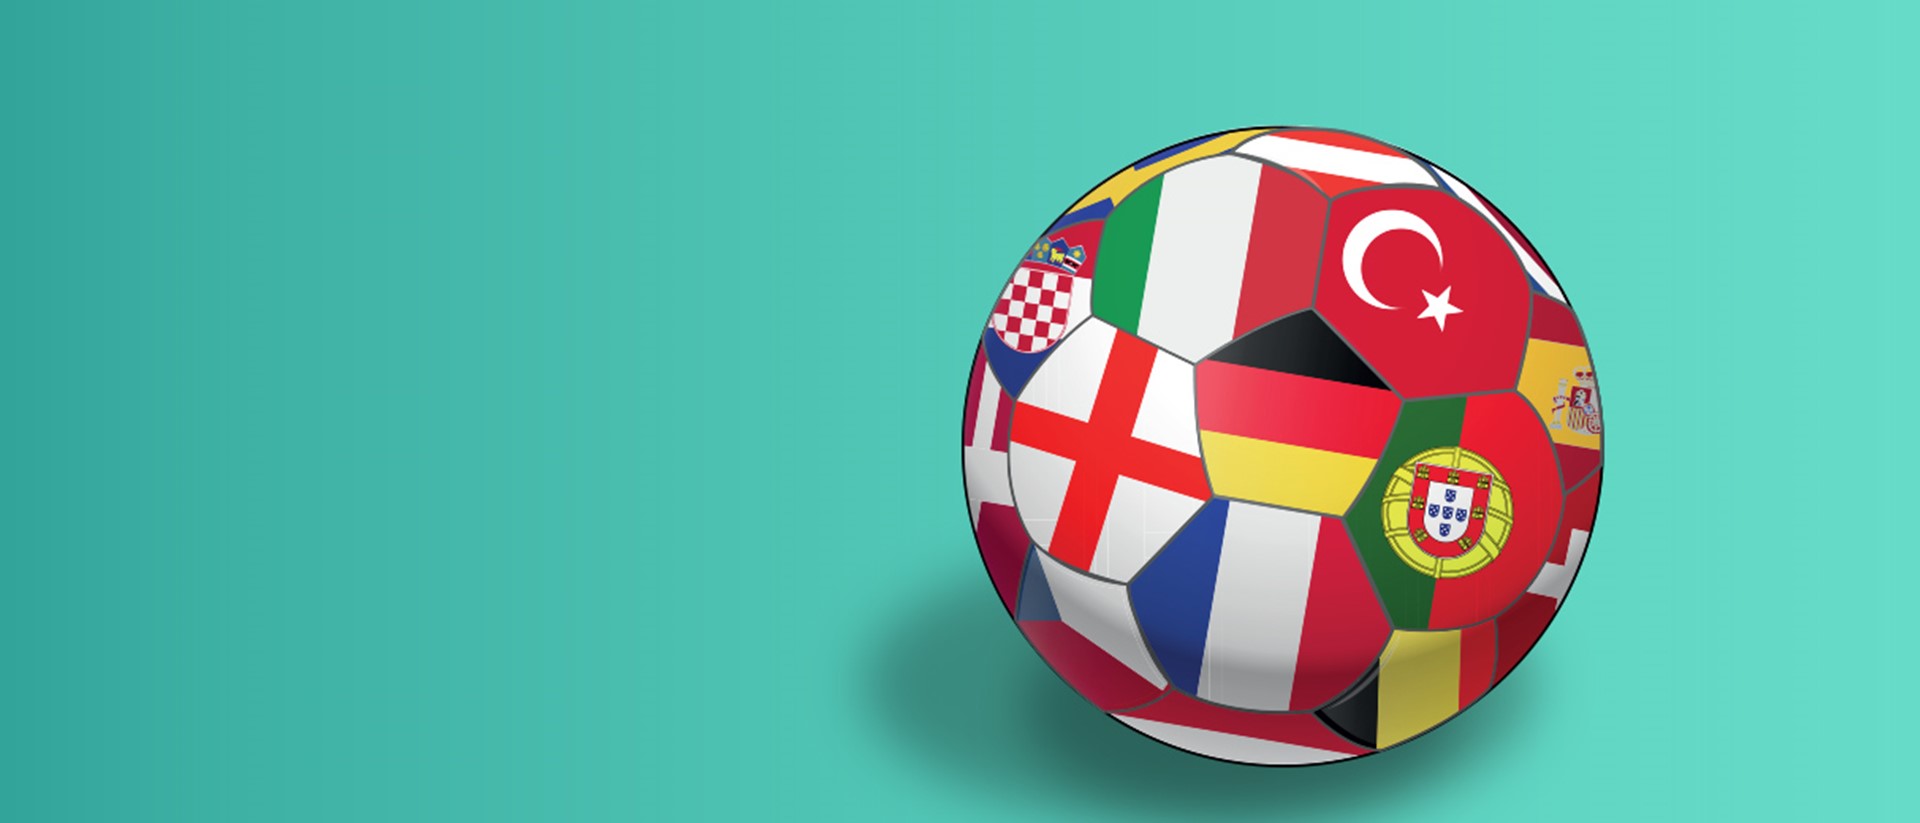 Image of a football with flags of European countries on a teal background